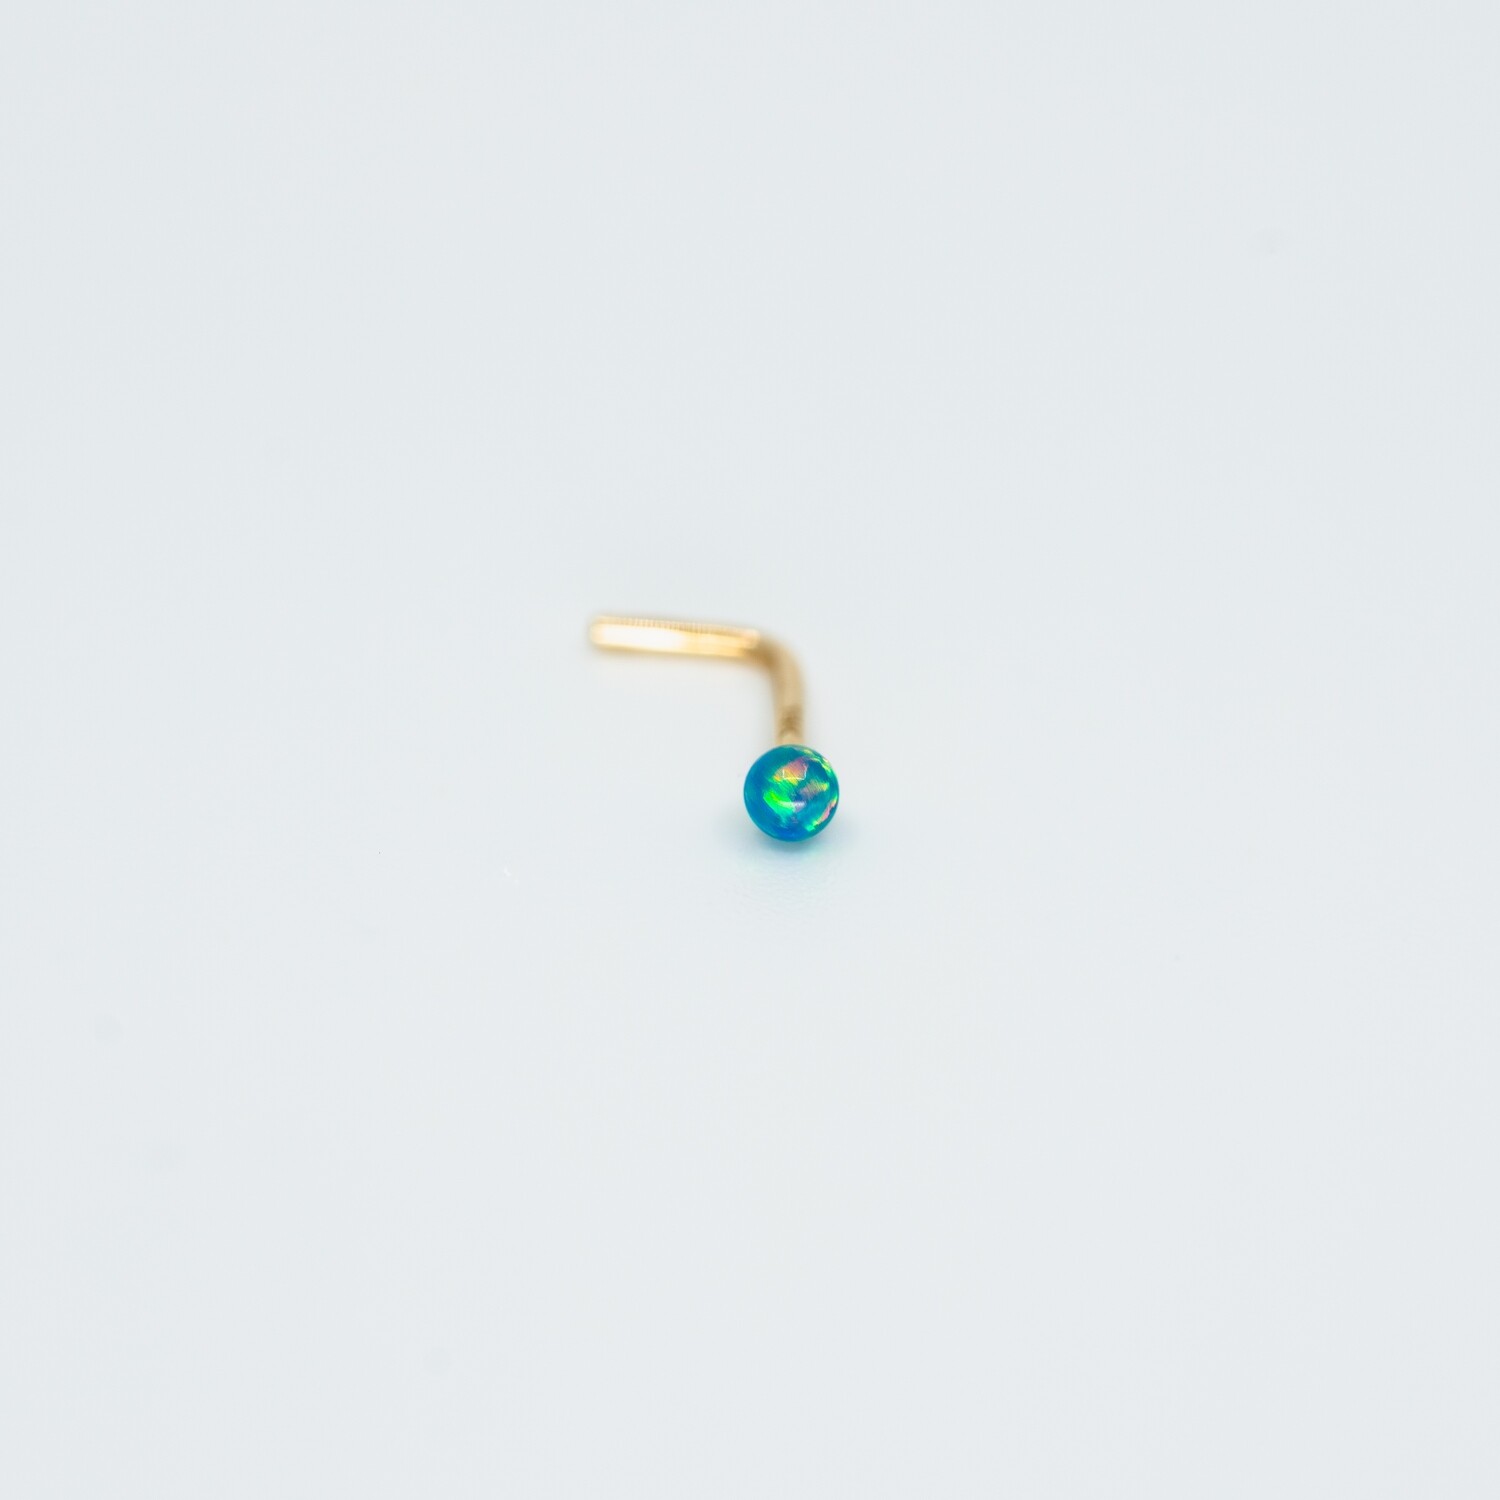 14kt. Gold Nose Piercing with a Green Marine Opal mark 14k Solid Gold New